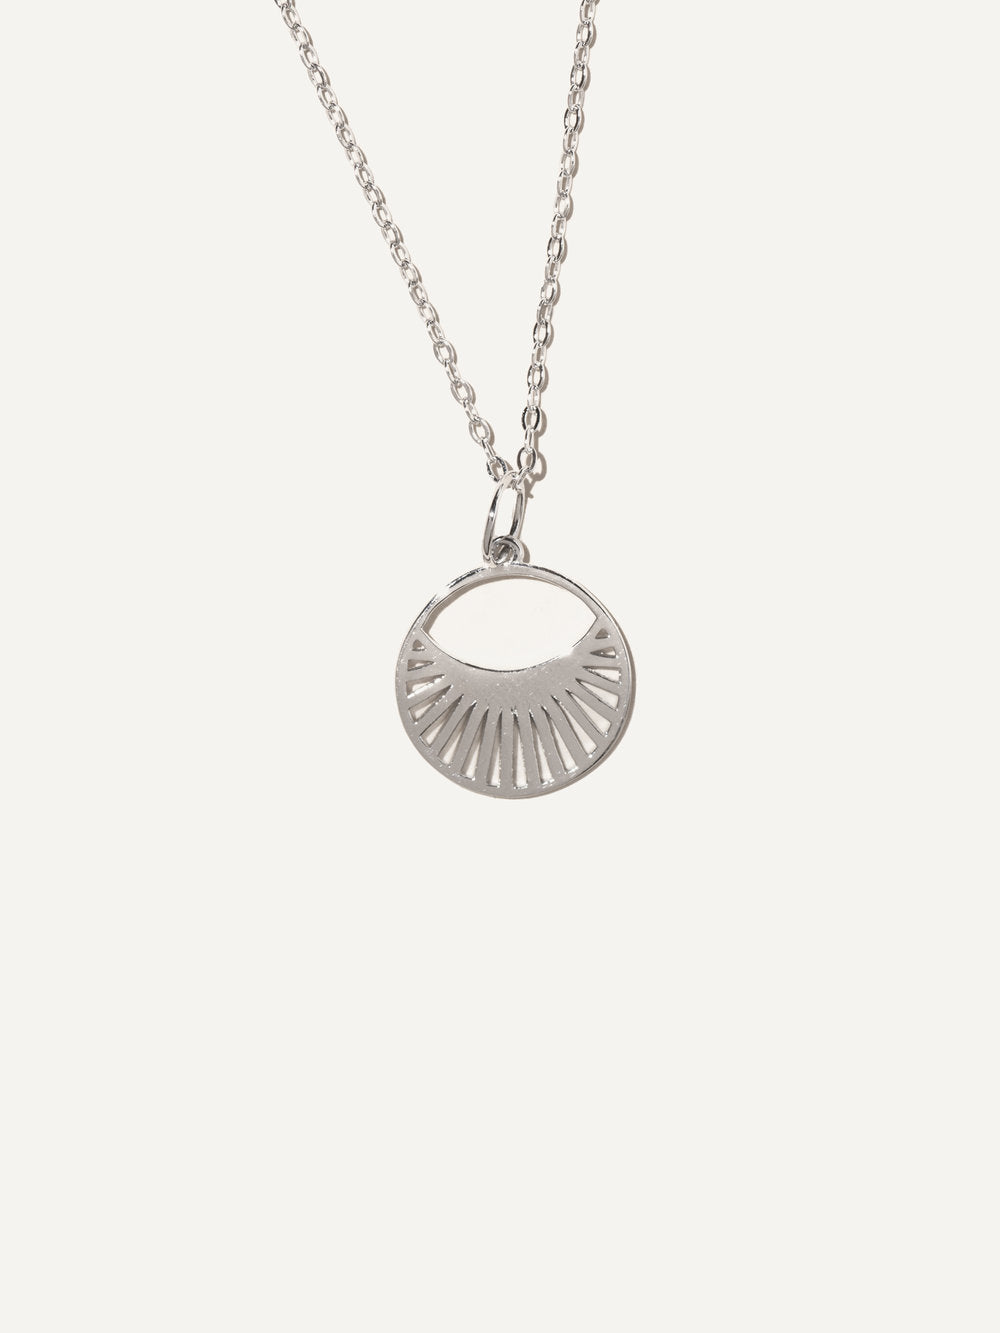 Boa Bijoux - SS24 - Surya Necklace Silver Sterling -  close-up 2